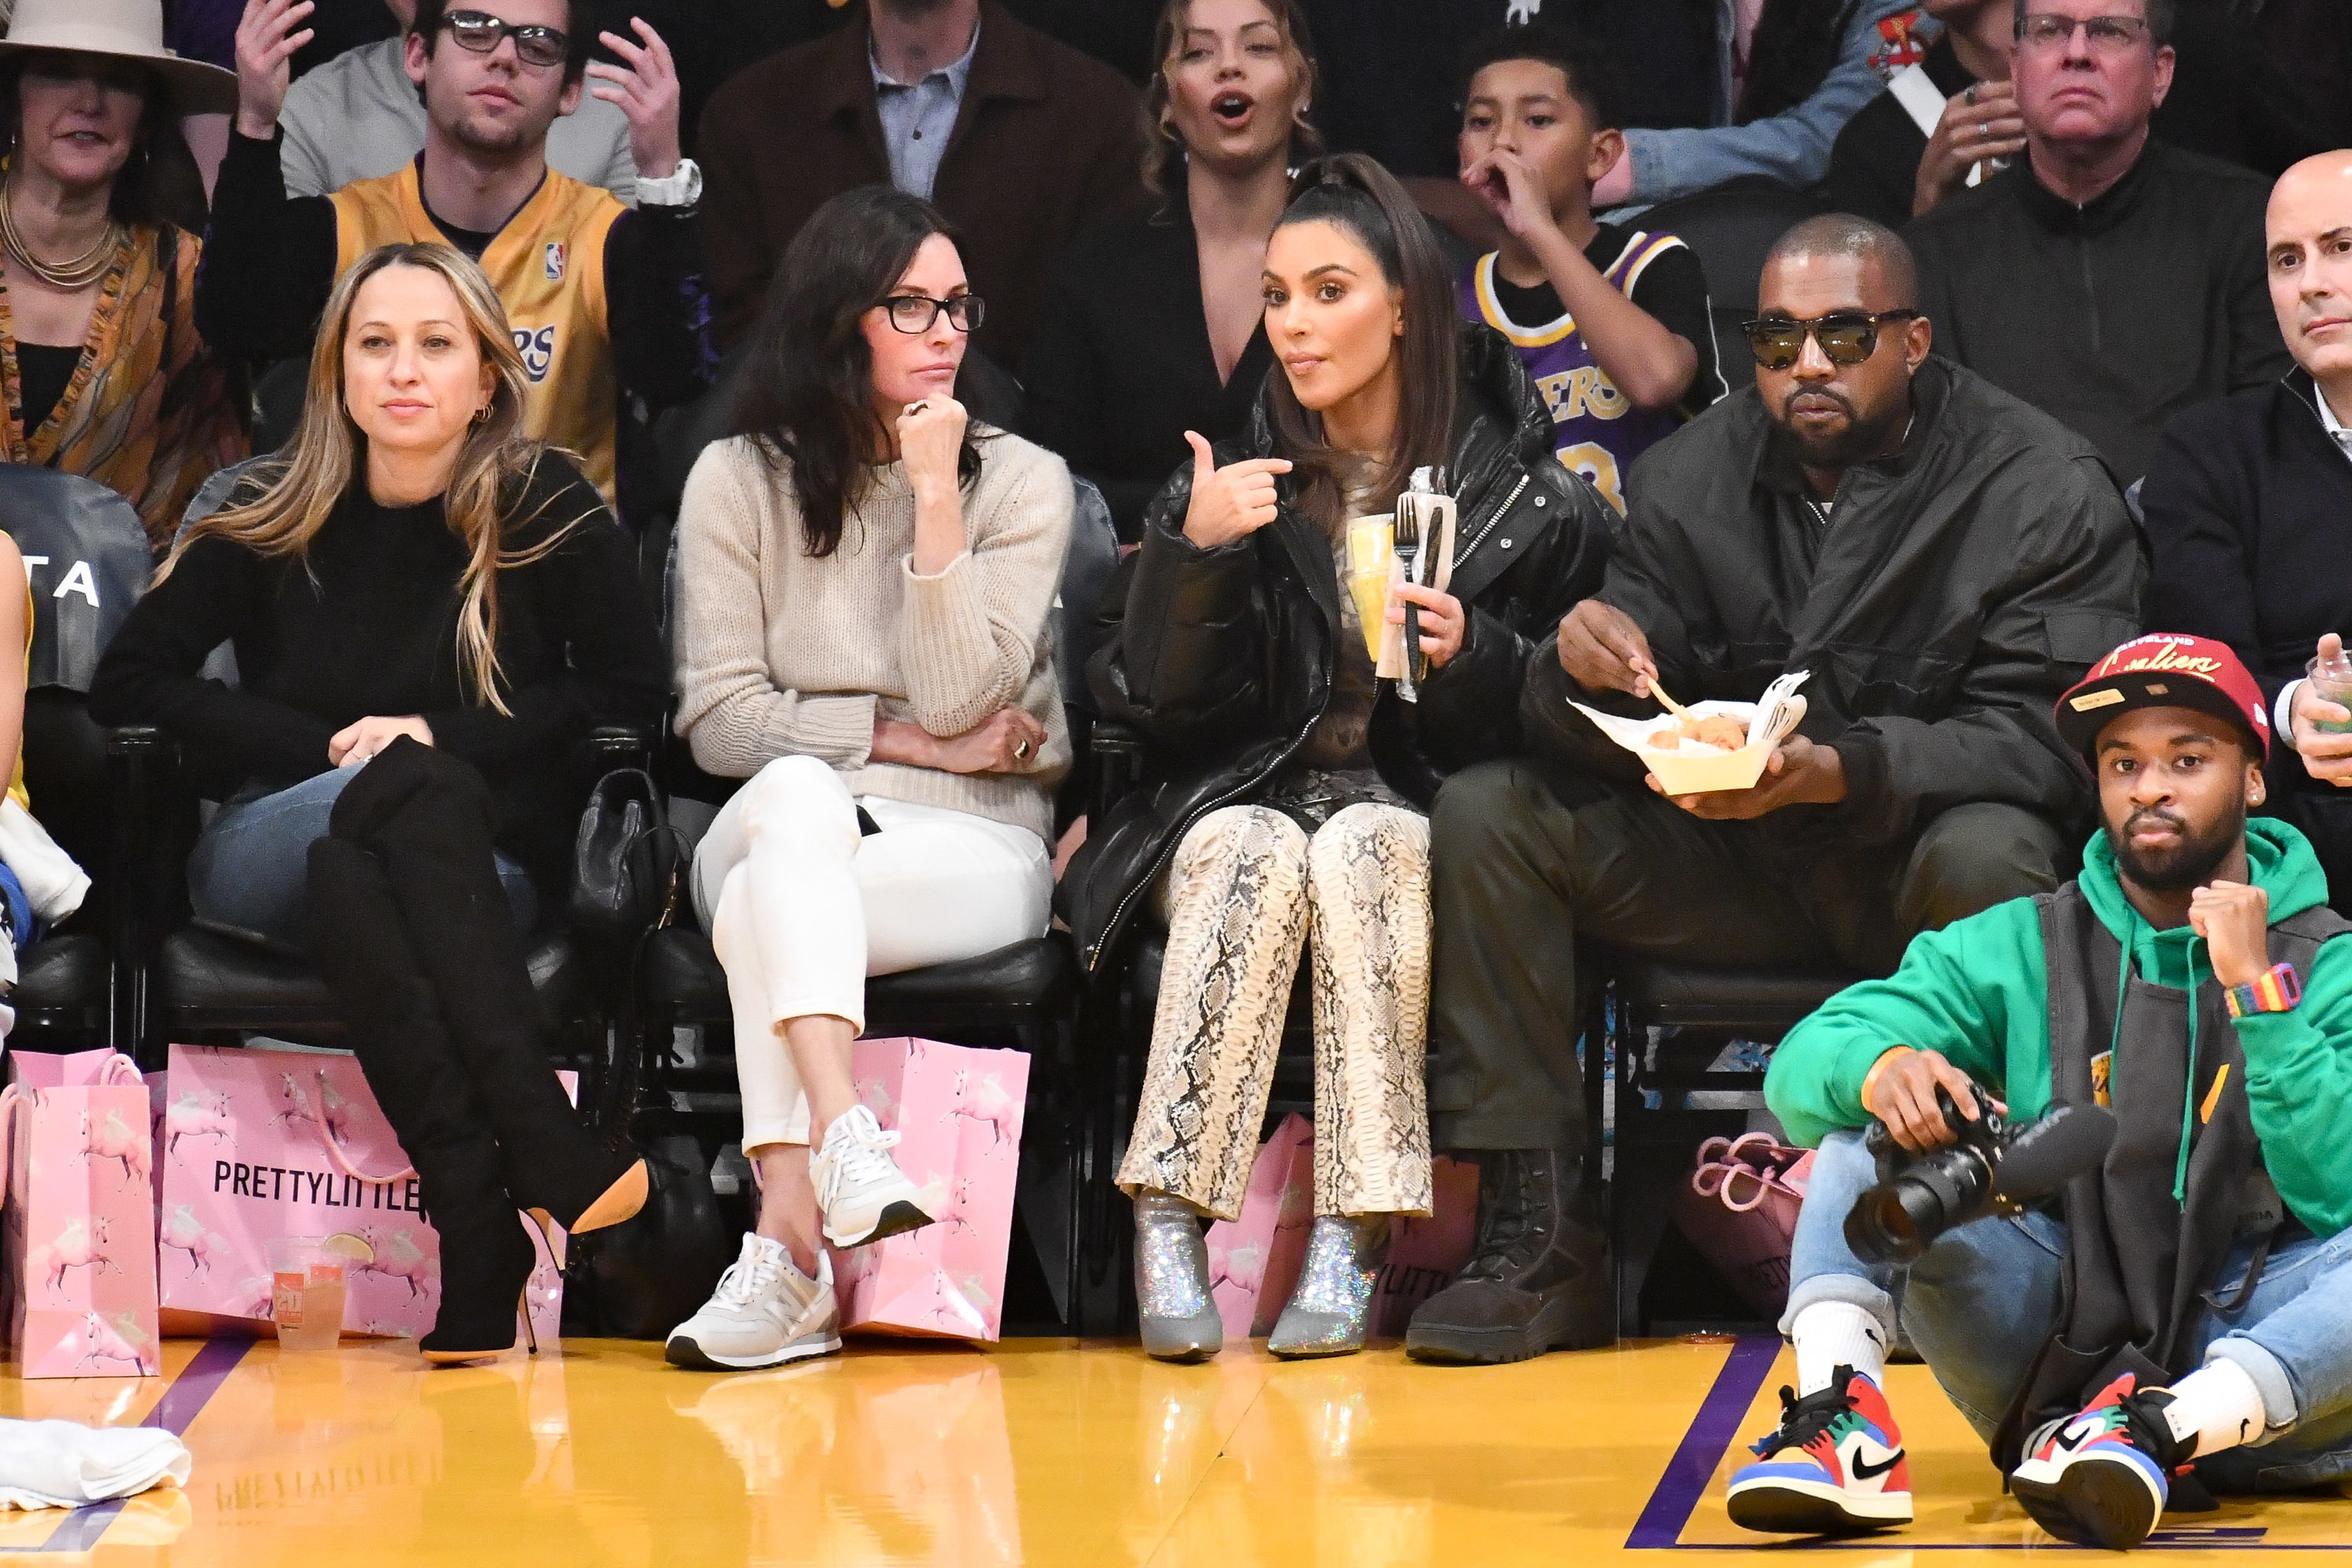 Little asian woman courtside lakers